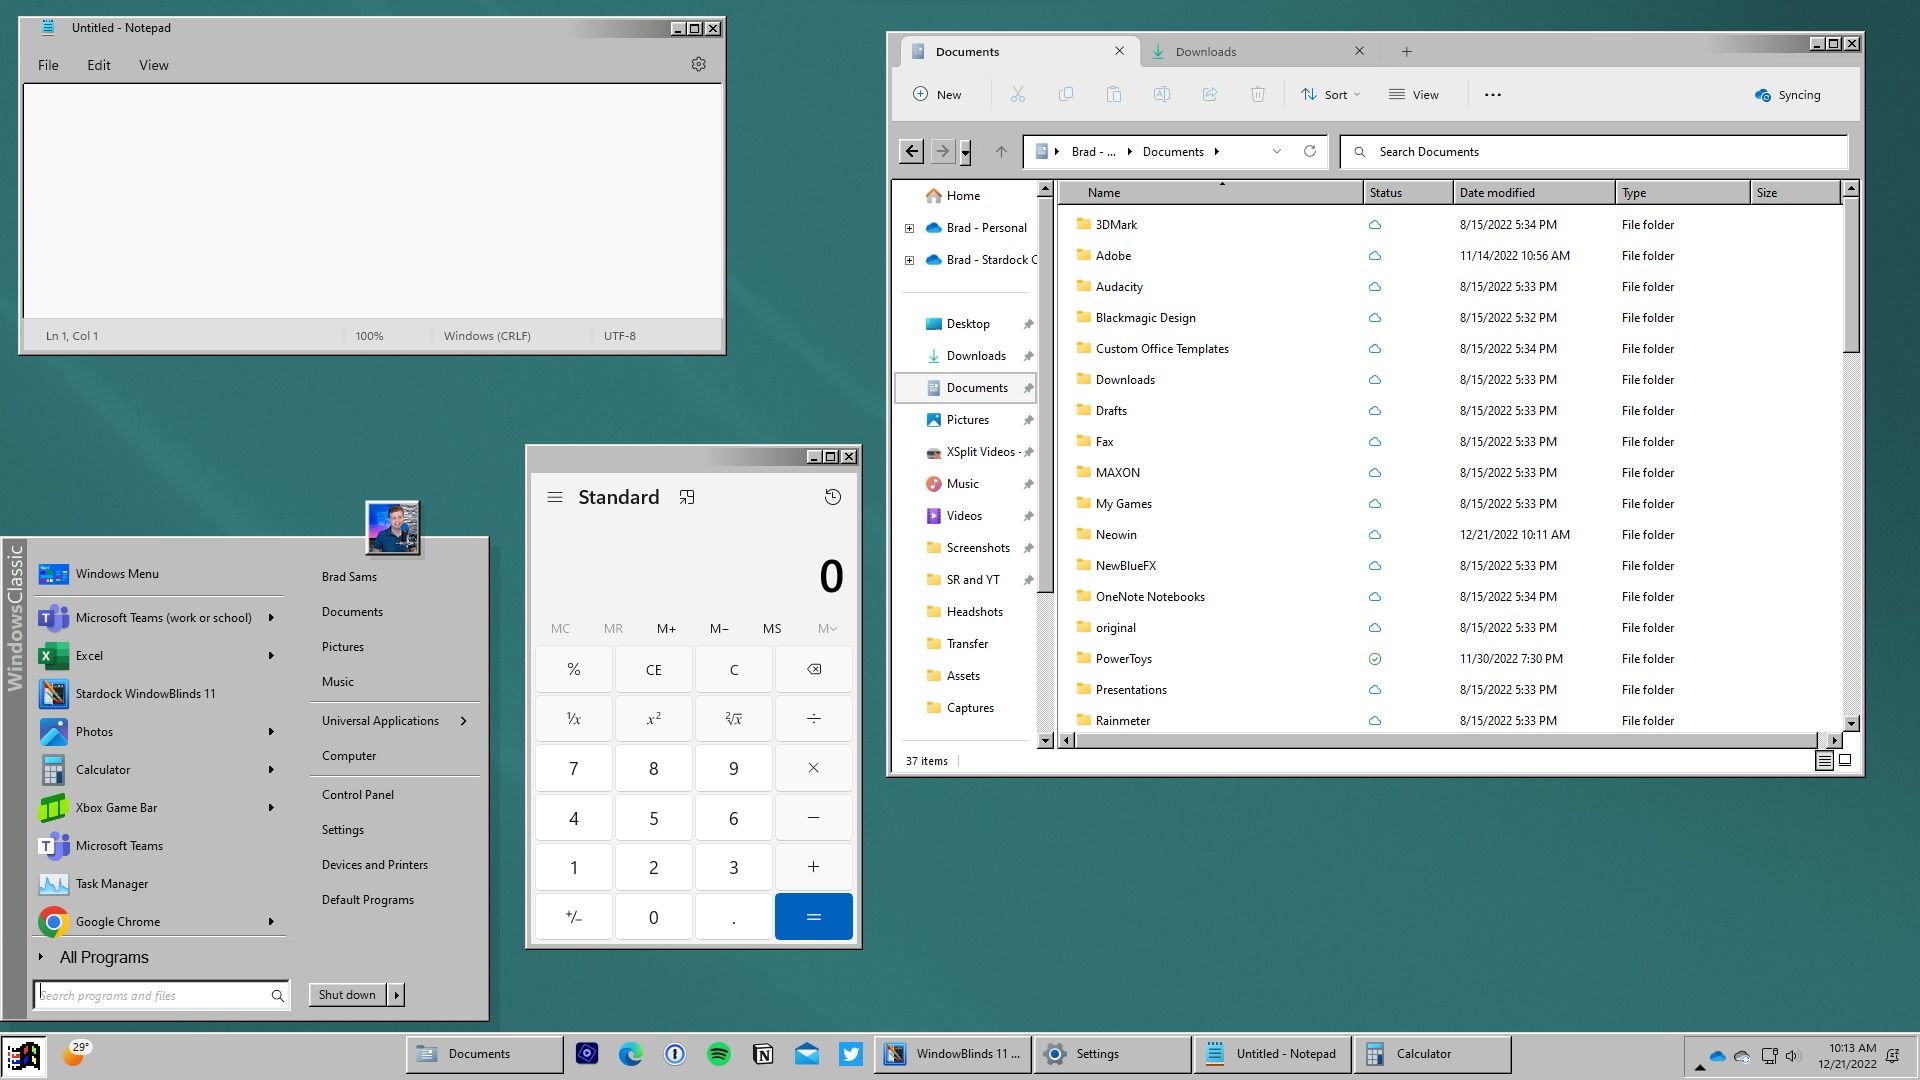 Windows 10X, the new version of Windows for dual screen devices, is shown in a screenshot. - Windows 95